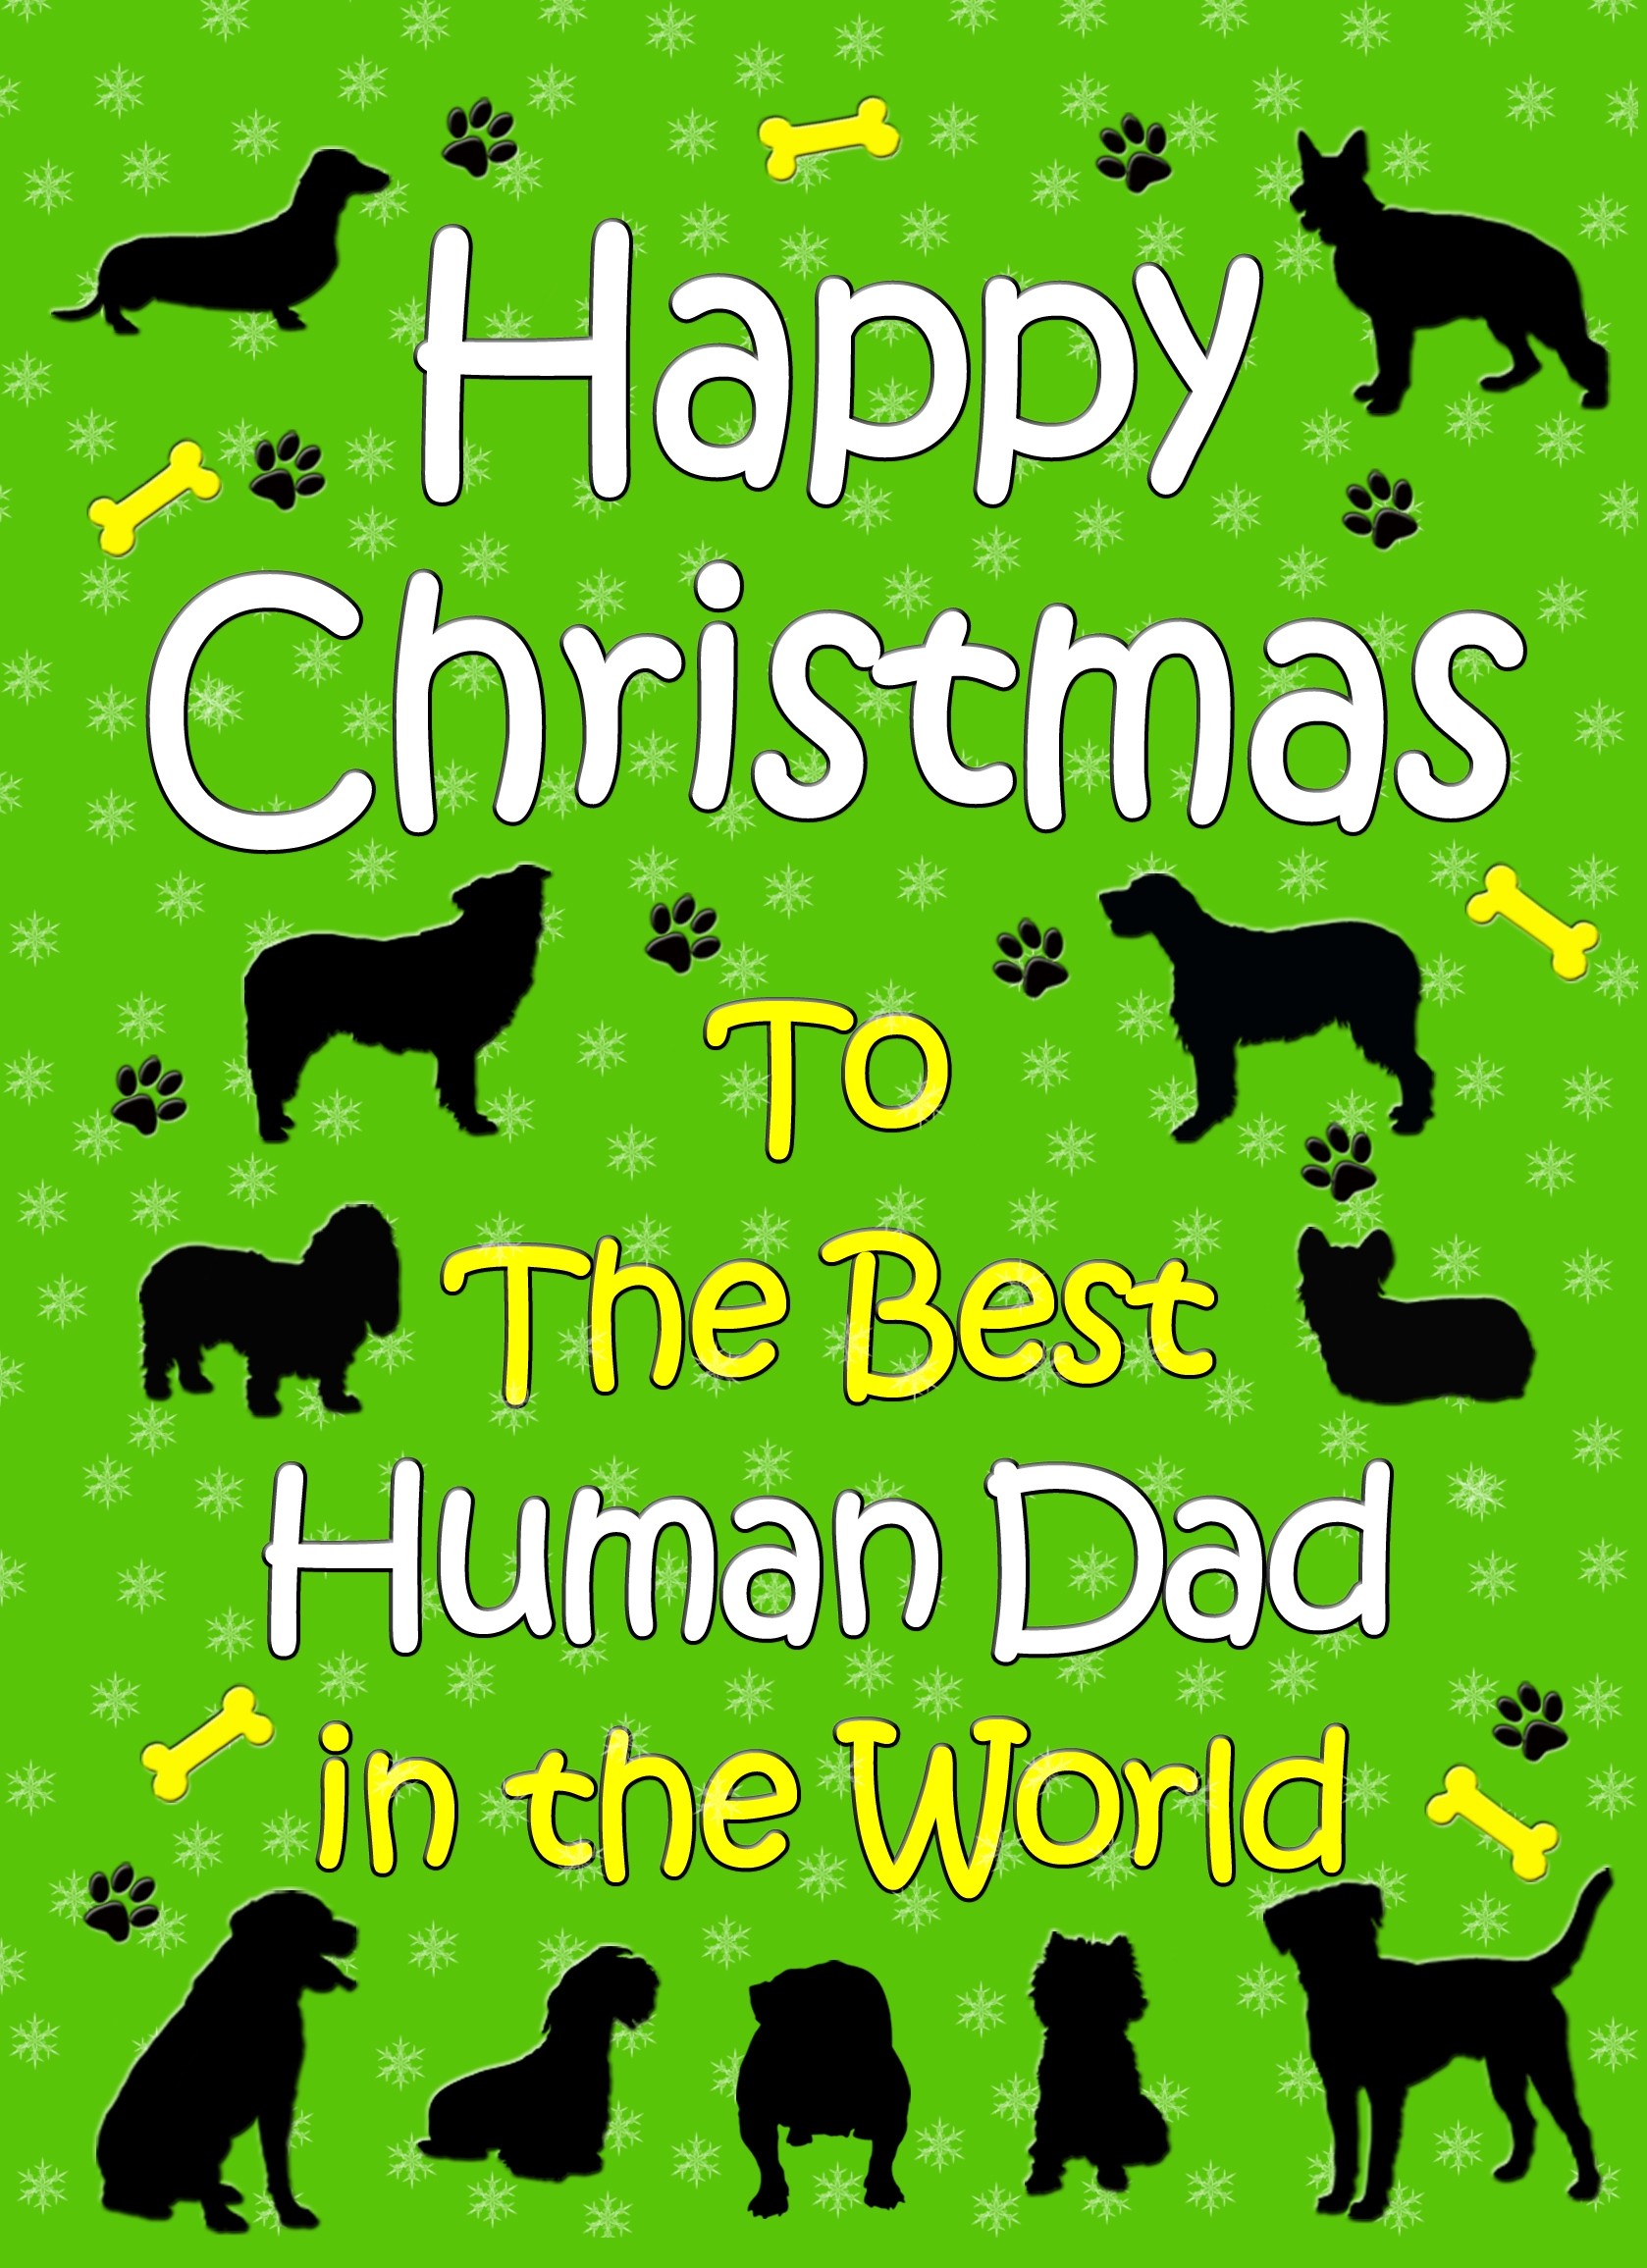 From The Dog  Christmas Card (Human Dad, Green)